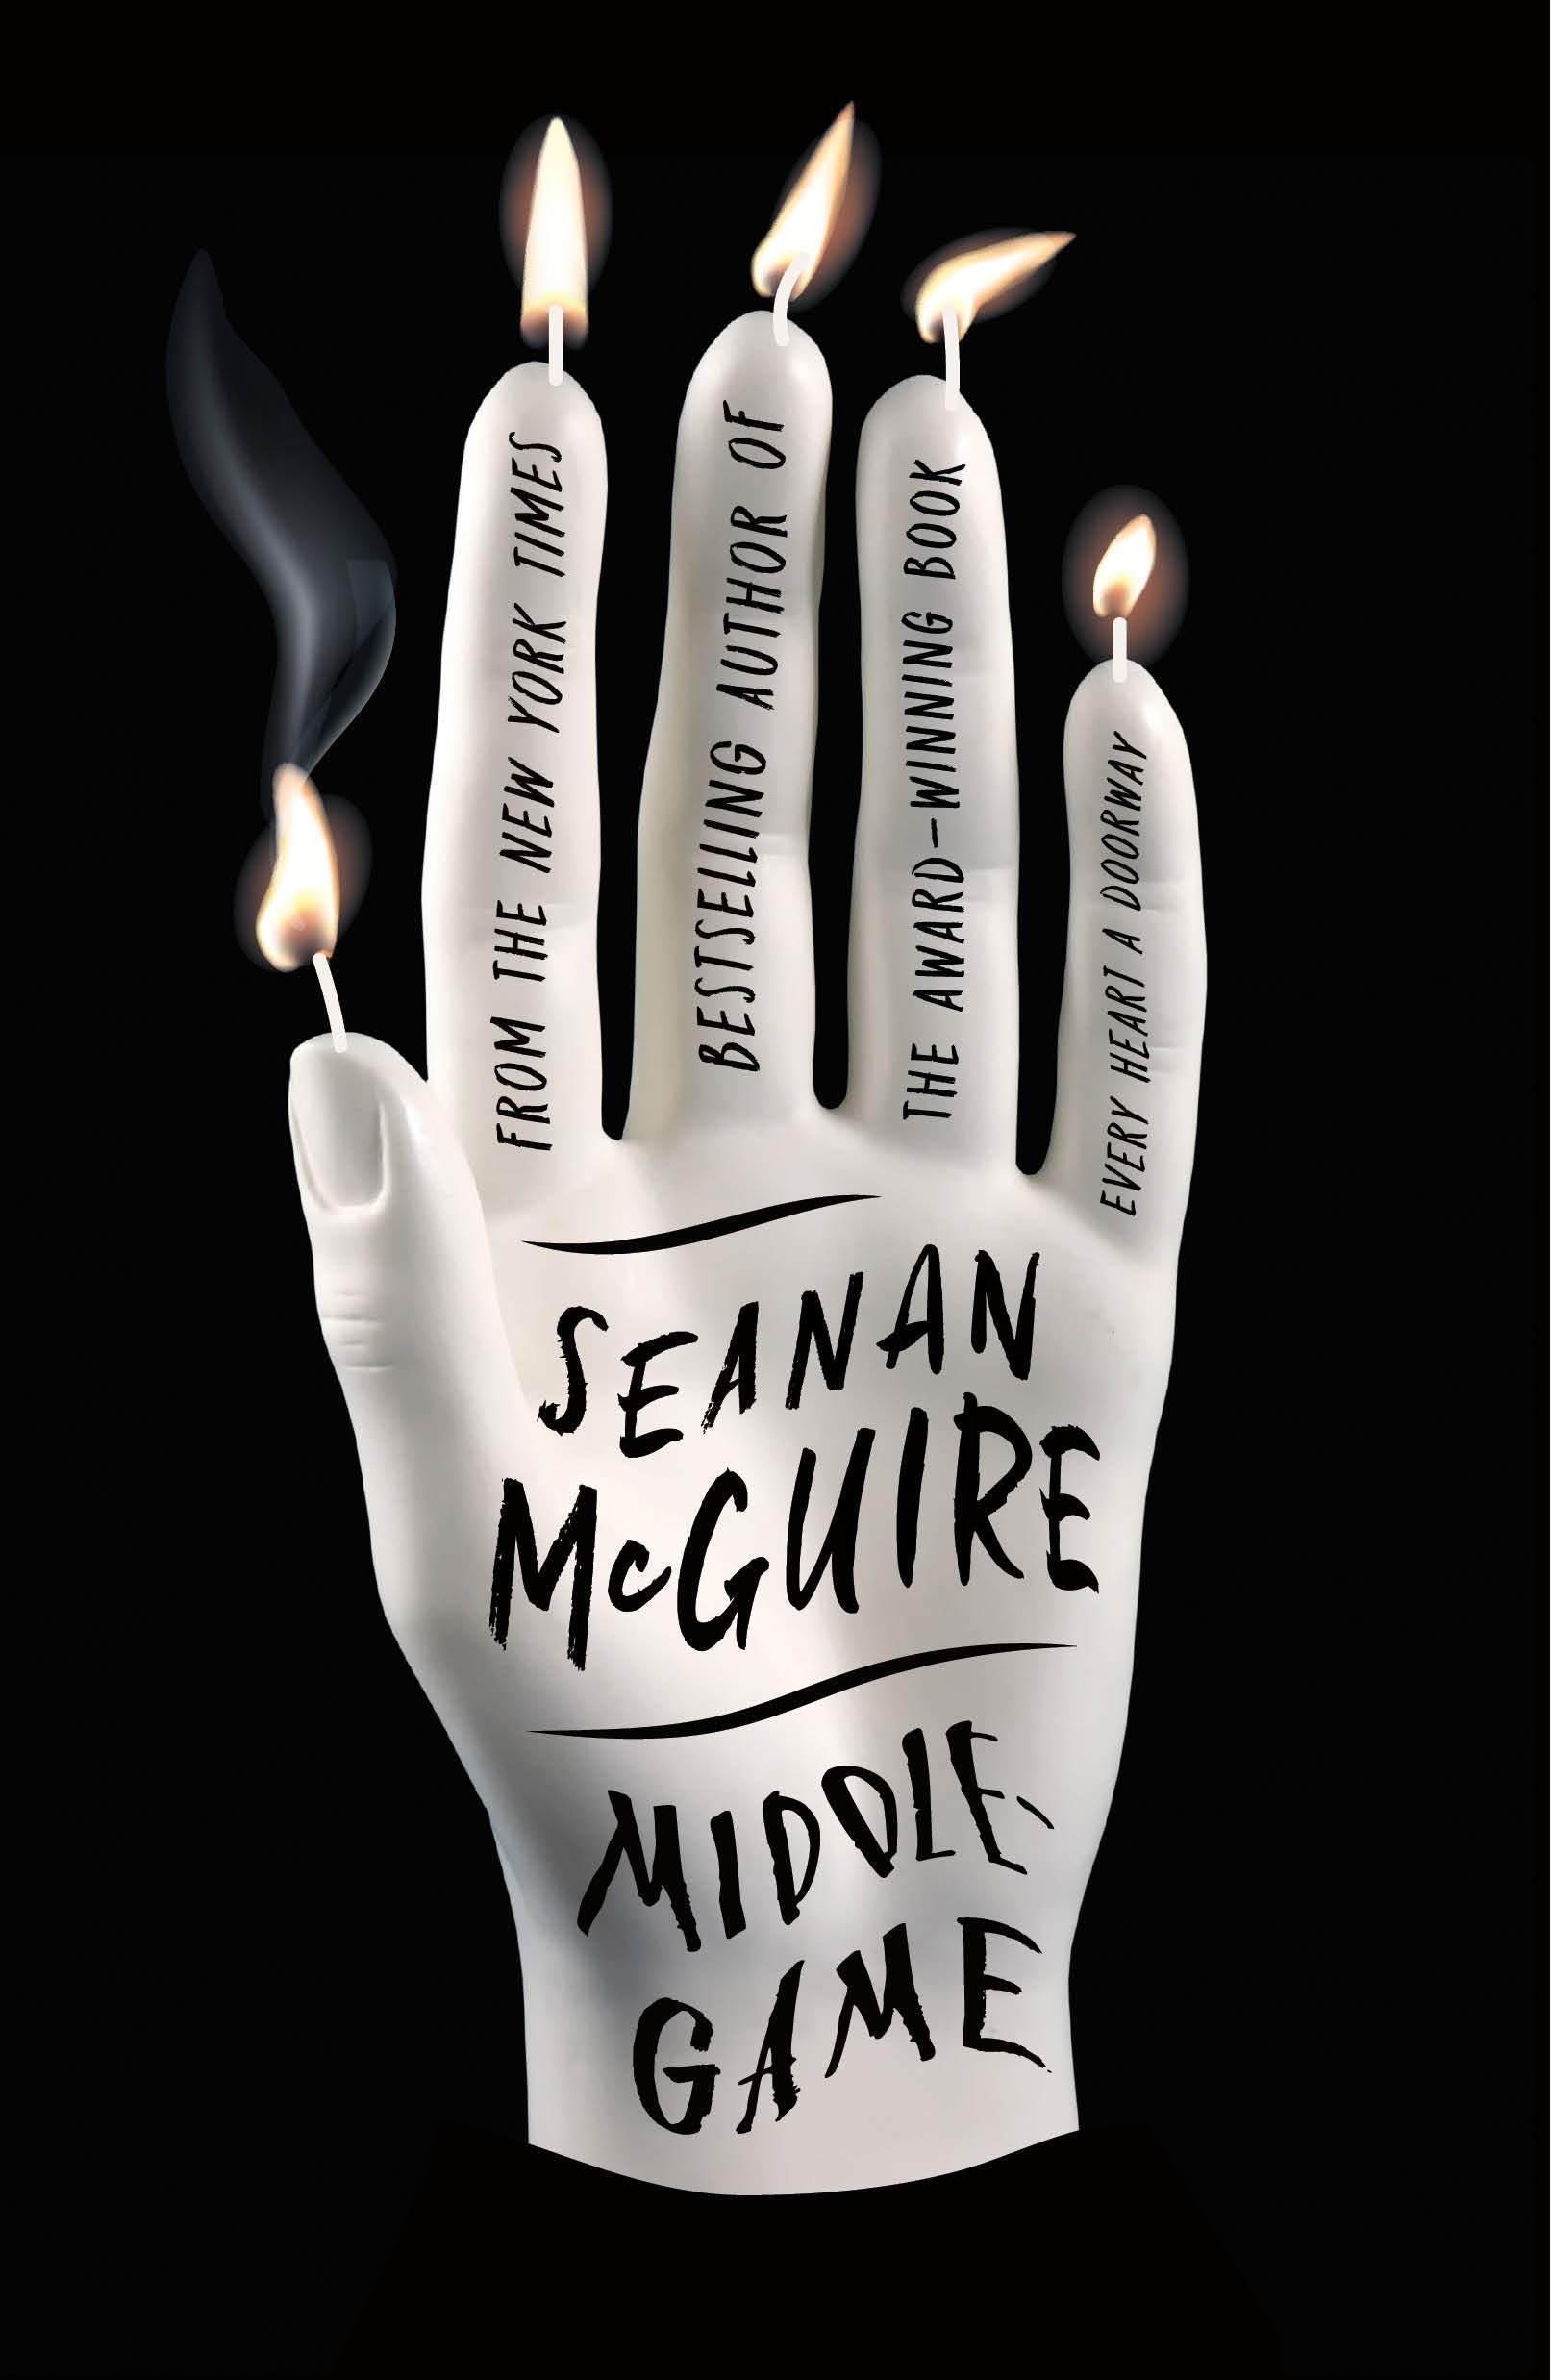 cover of middlegame by seanan mcguire - cover has a black background with a white hand on it. fingertips are lit candles